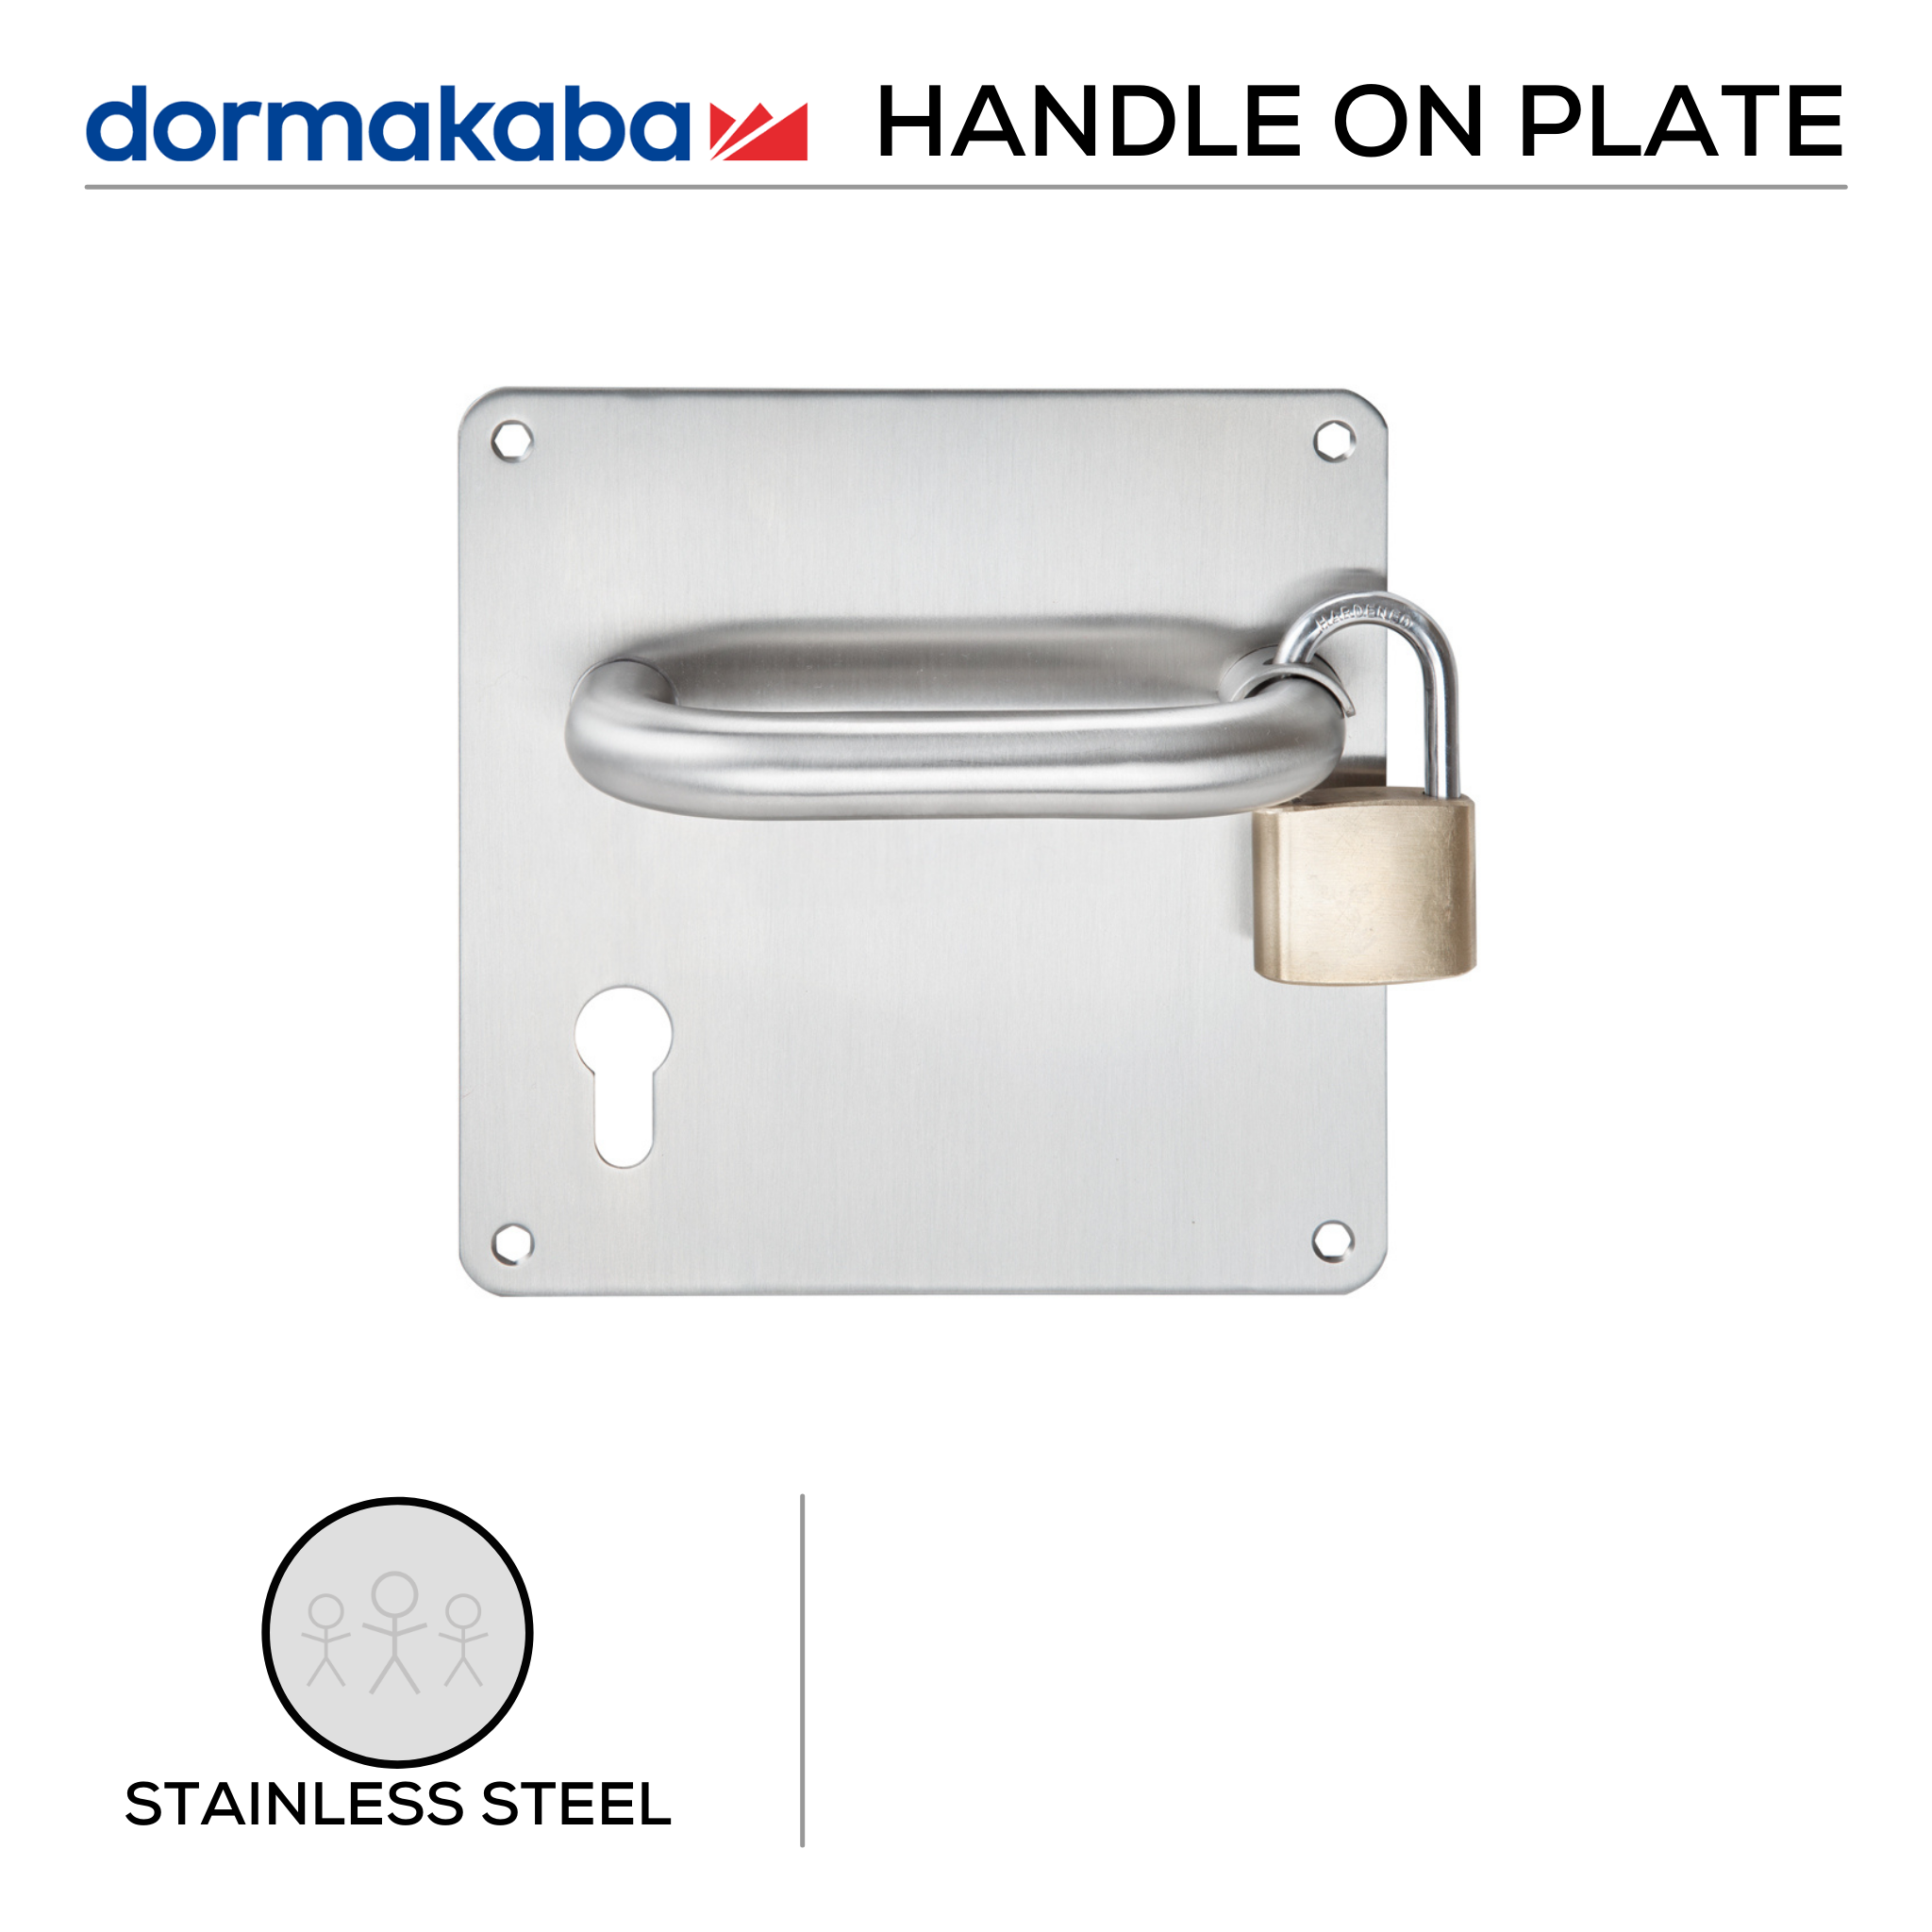 TH 120/RES RH, Lever Handles, Tubular, On 170 x 170mm Back Plate, With Cylinder Escutcheons, 170mm (l), Stainless Steel, DORMAKABA